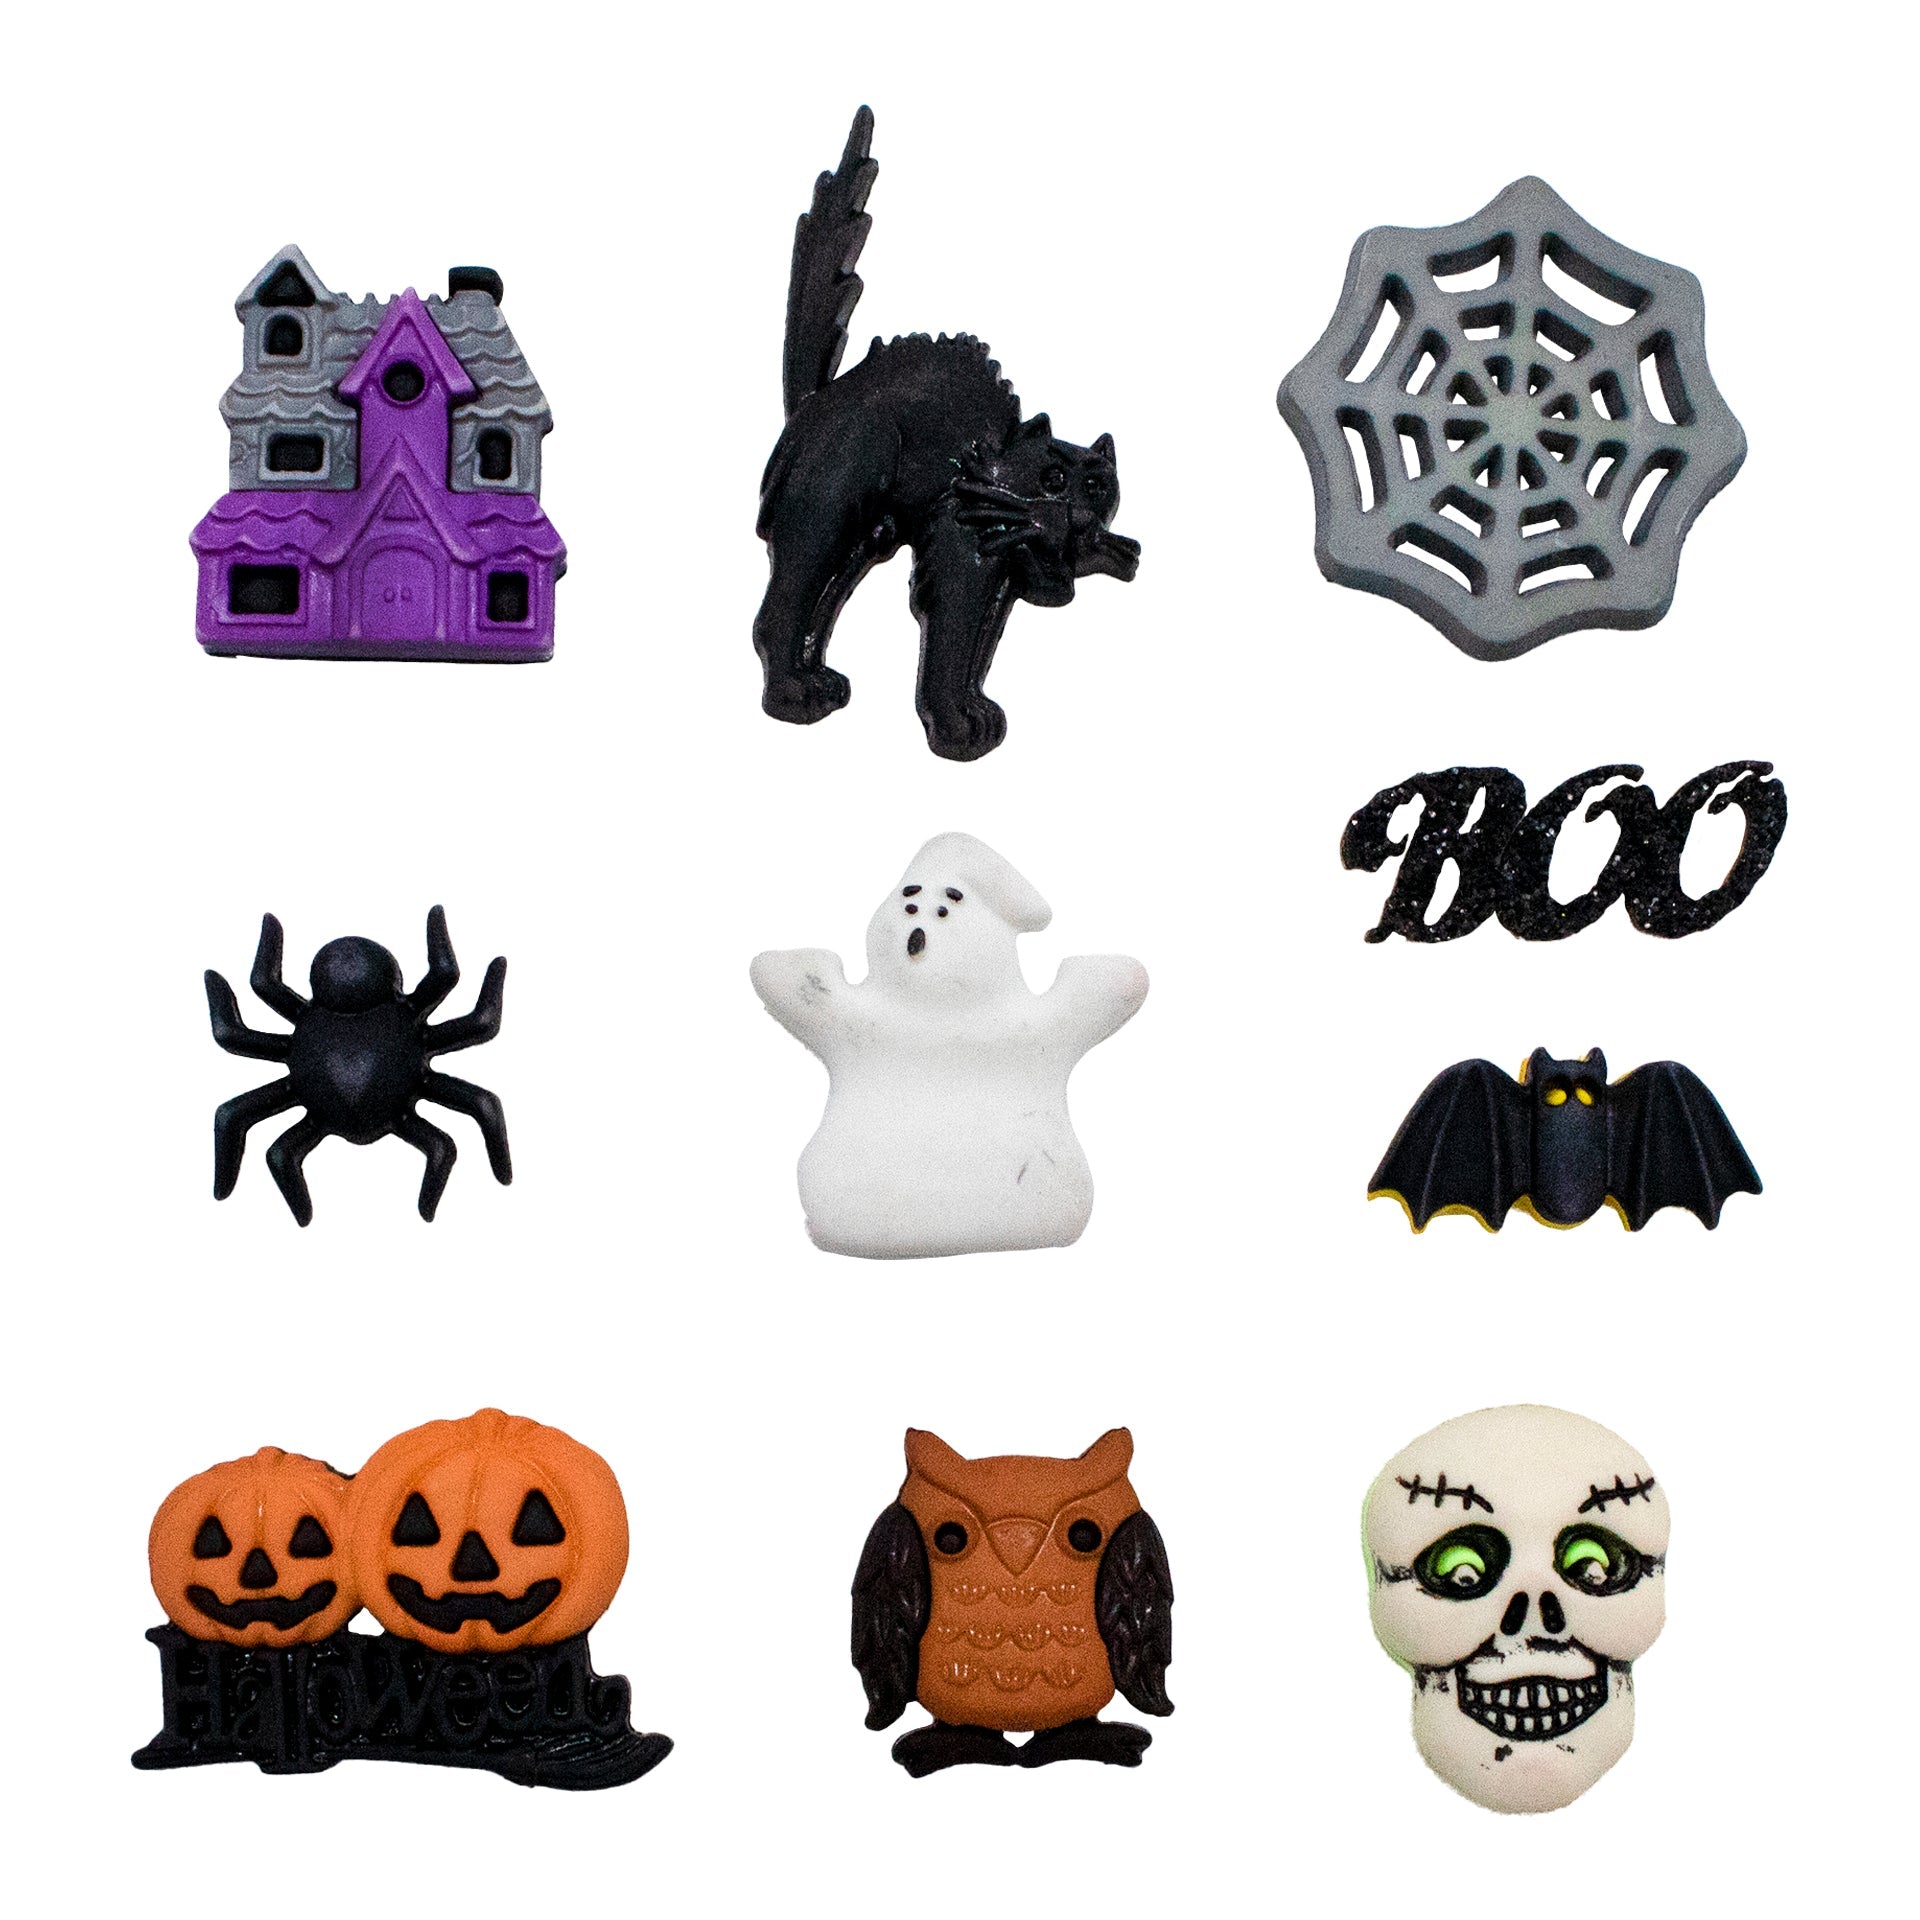 Halloween Set 2 - Buttons Galore and More